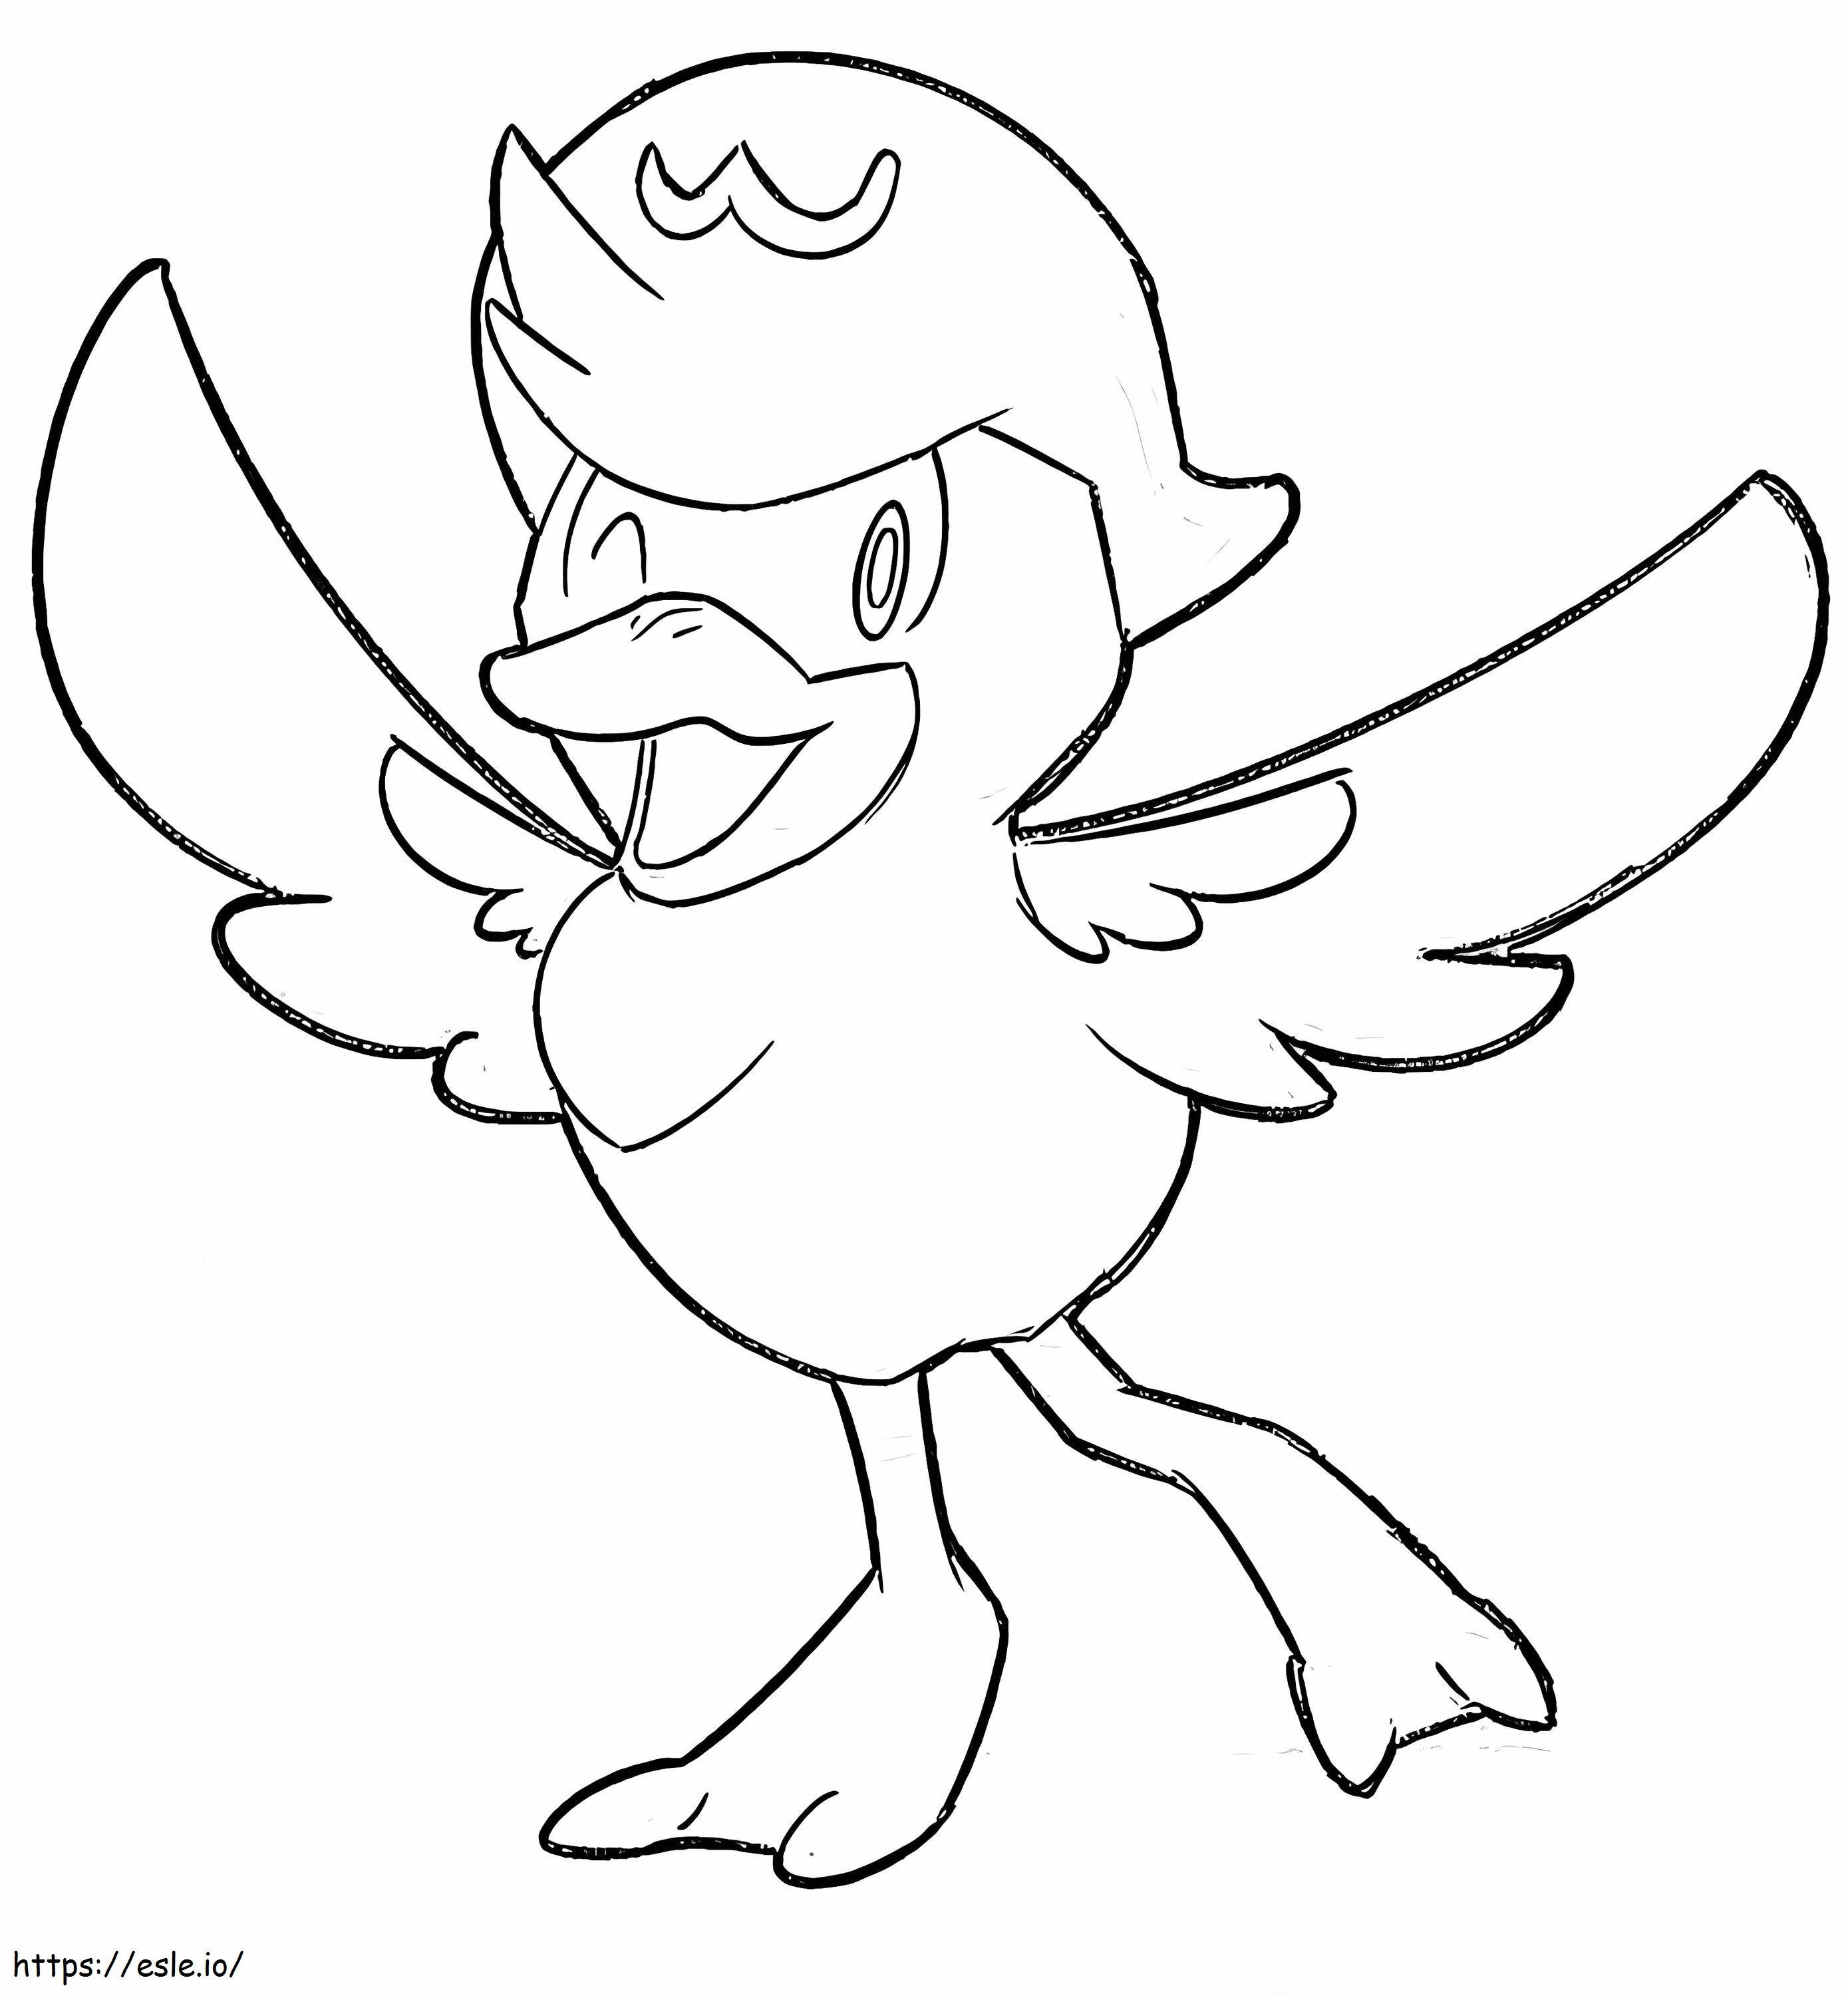 Pokemon Quaxly coloring page